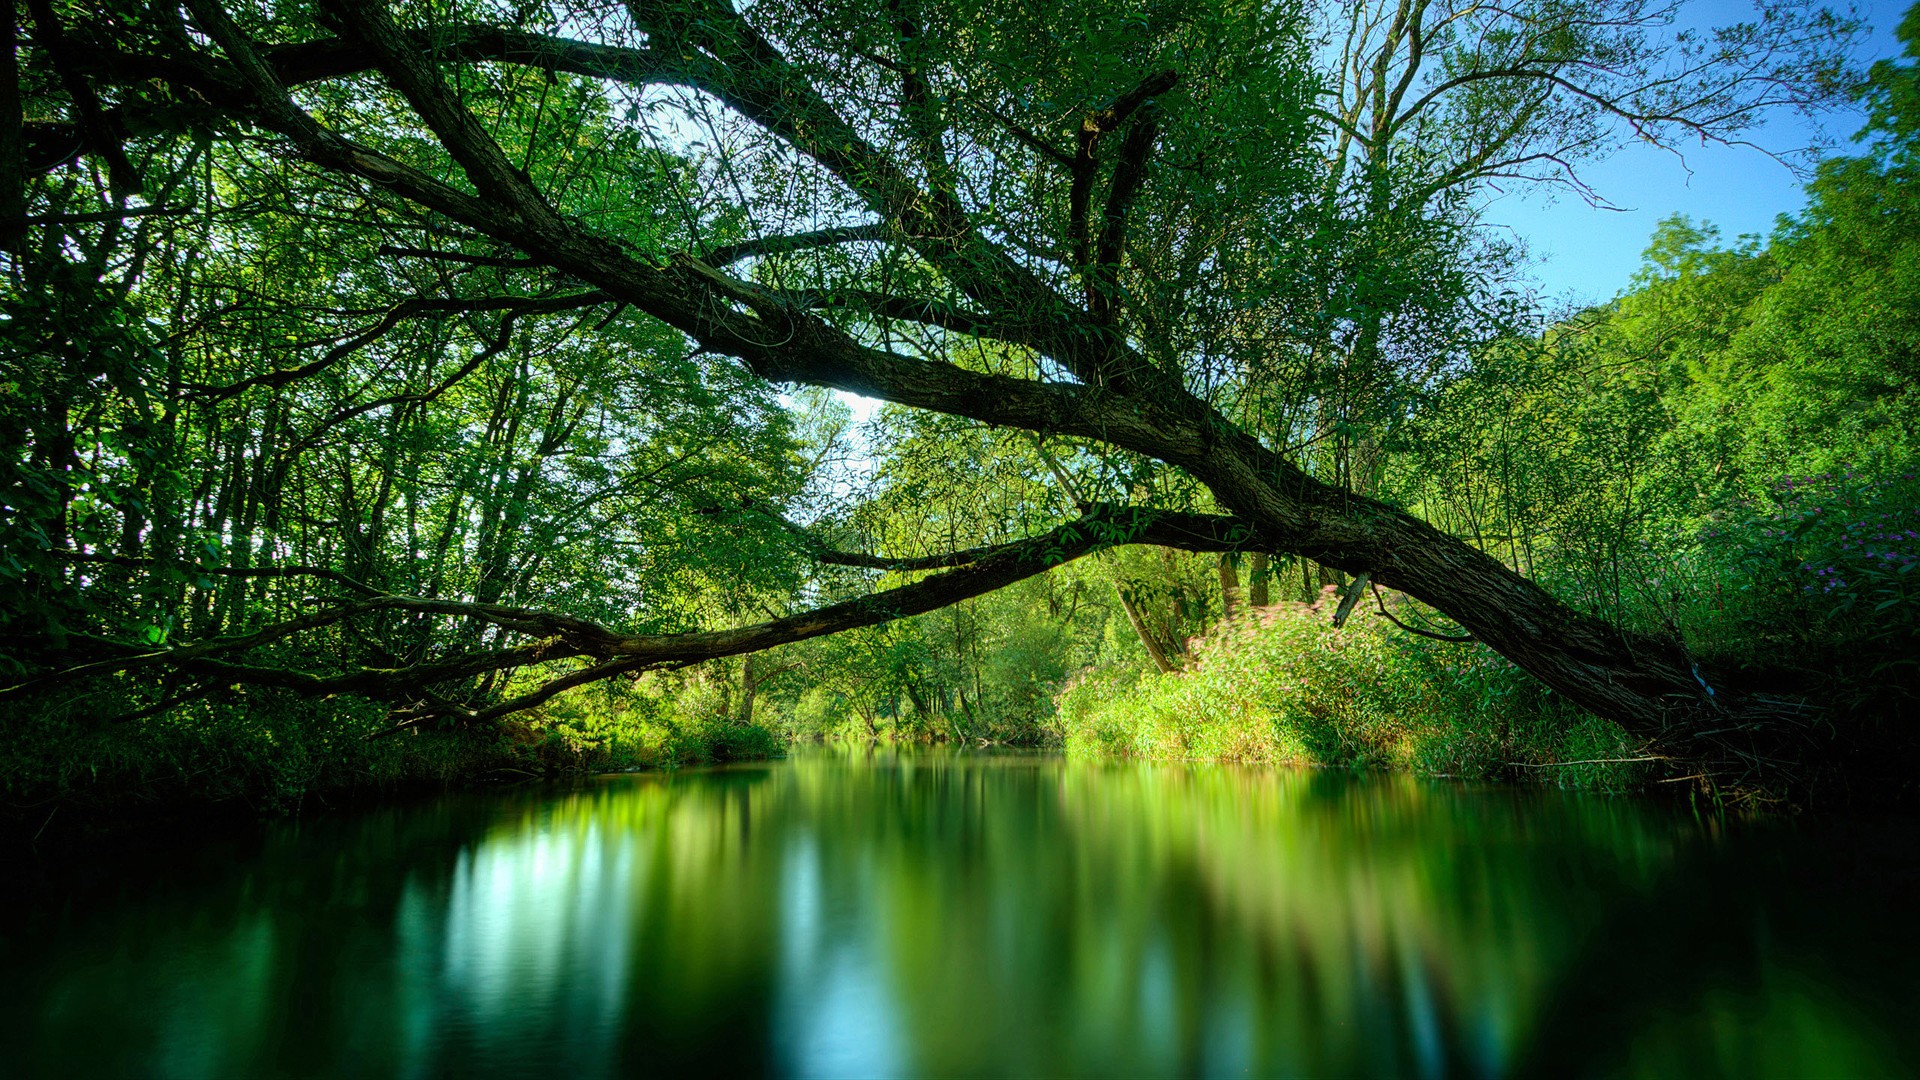 General 1920x1080 trees forest green blurred nature river water plants